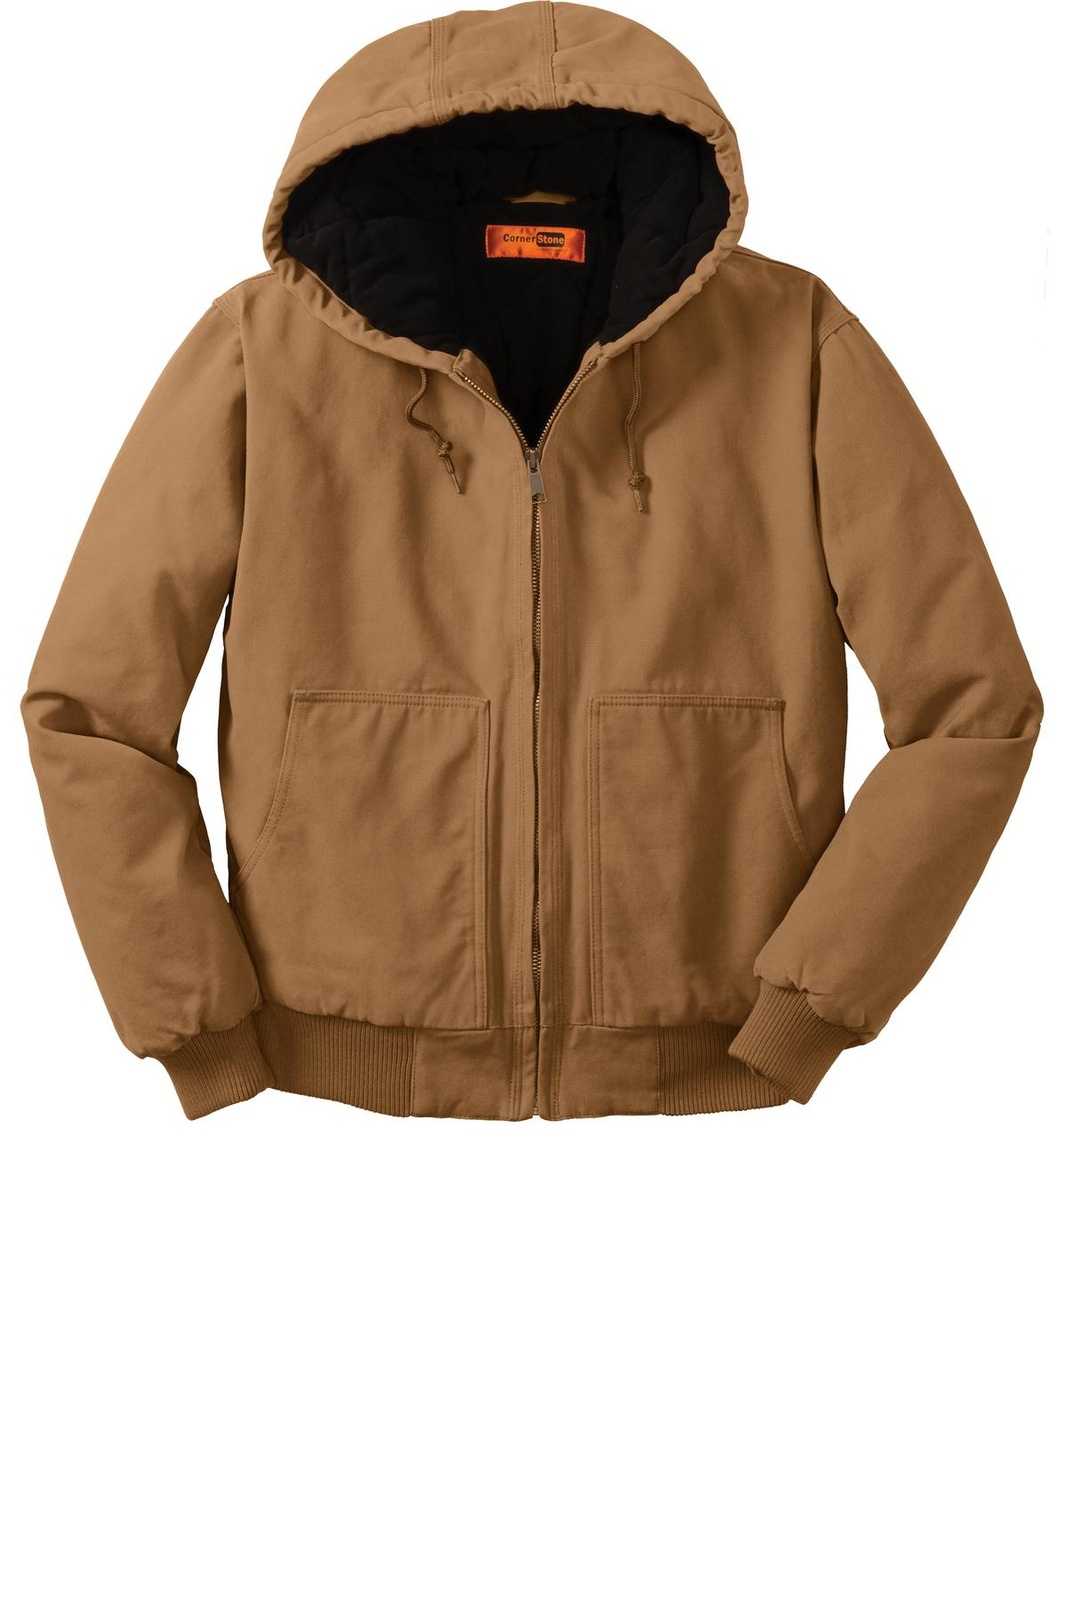 CornerStone CSJ41 Washed Duck Cloth Insulated Hooded Work Jacket - Duck Brown - HIT a Double - 5